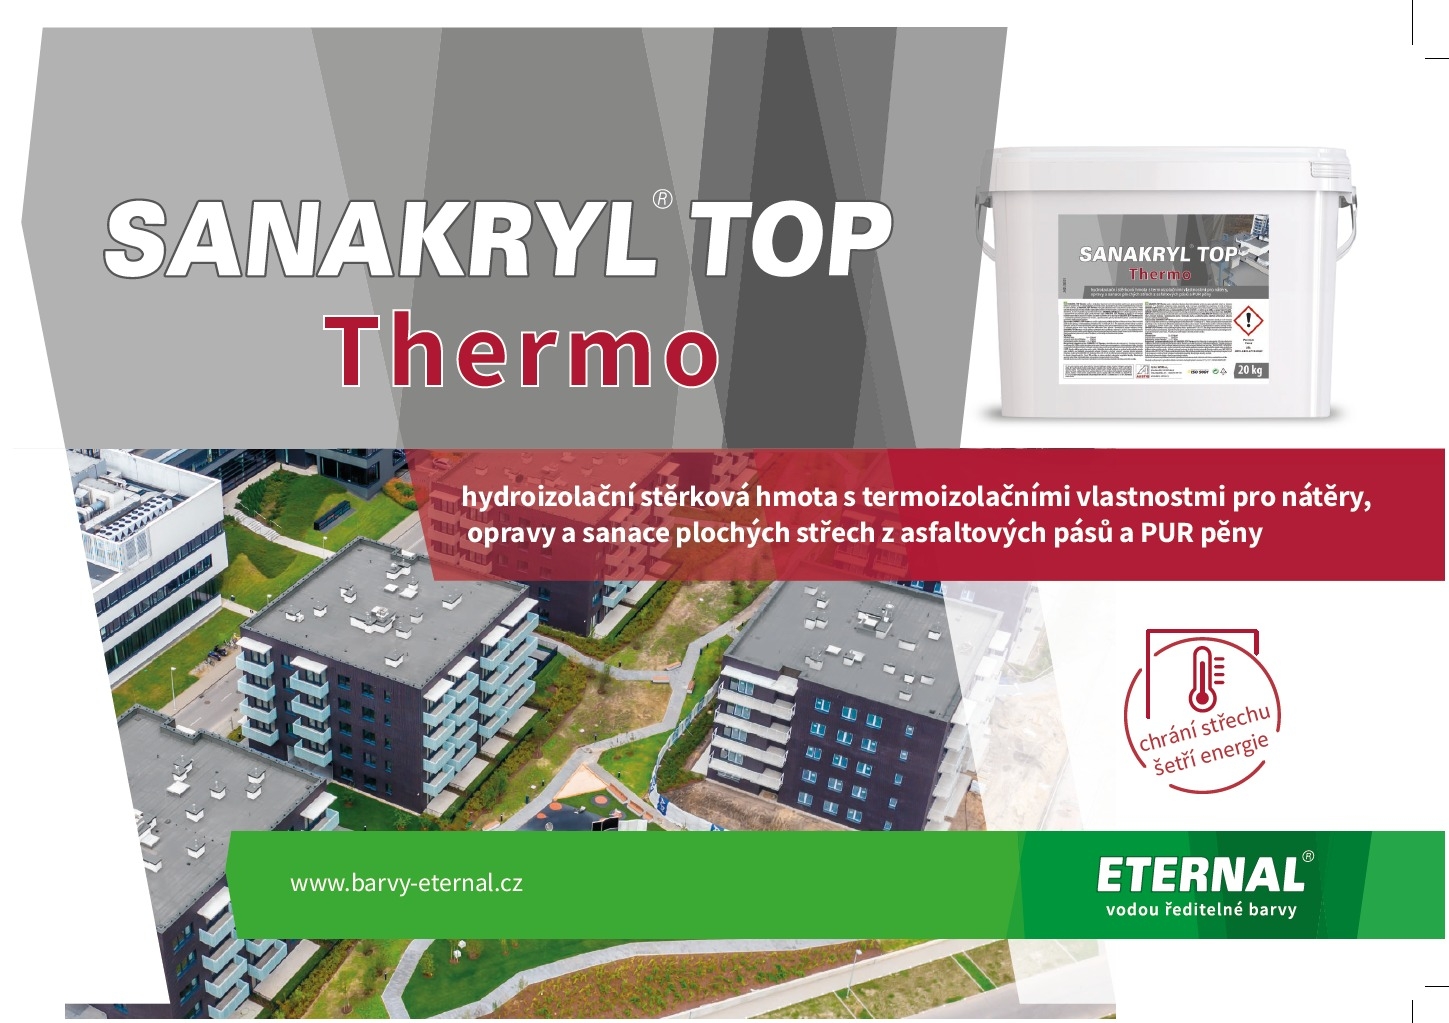 Sanakryl top Thermo 5